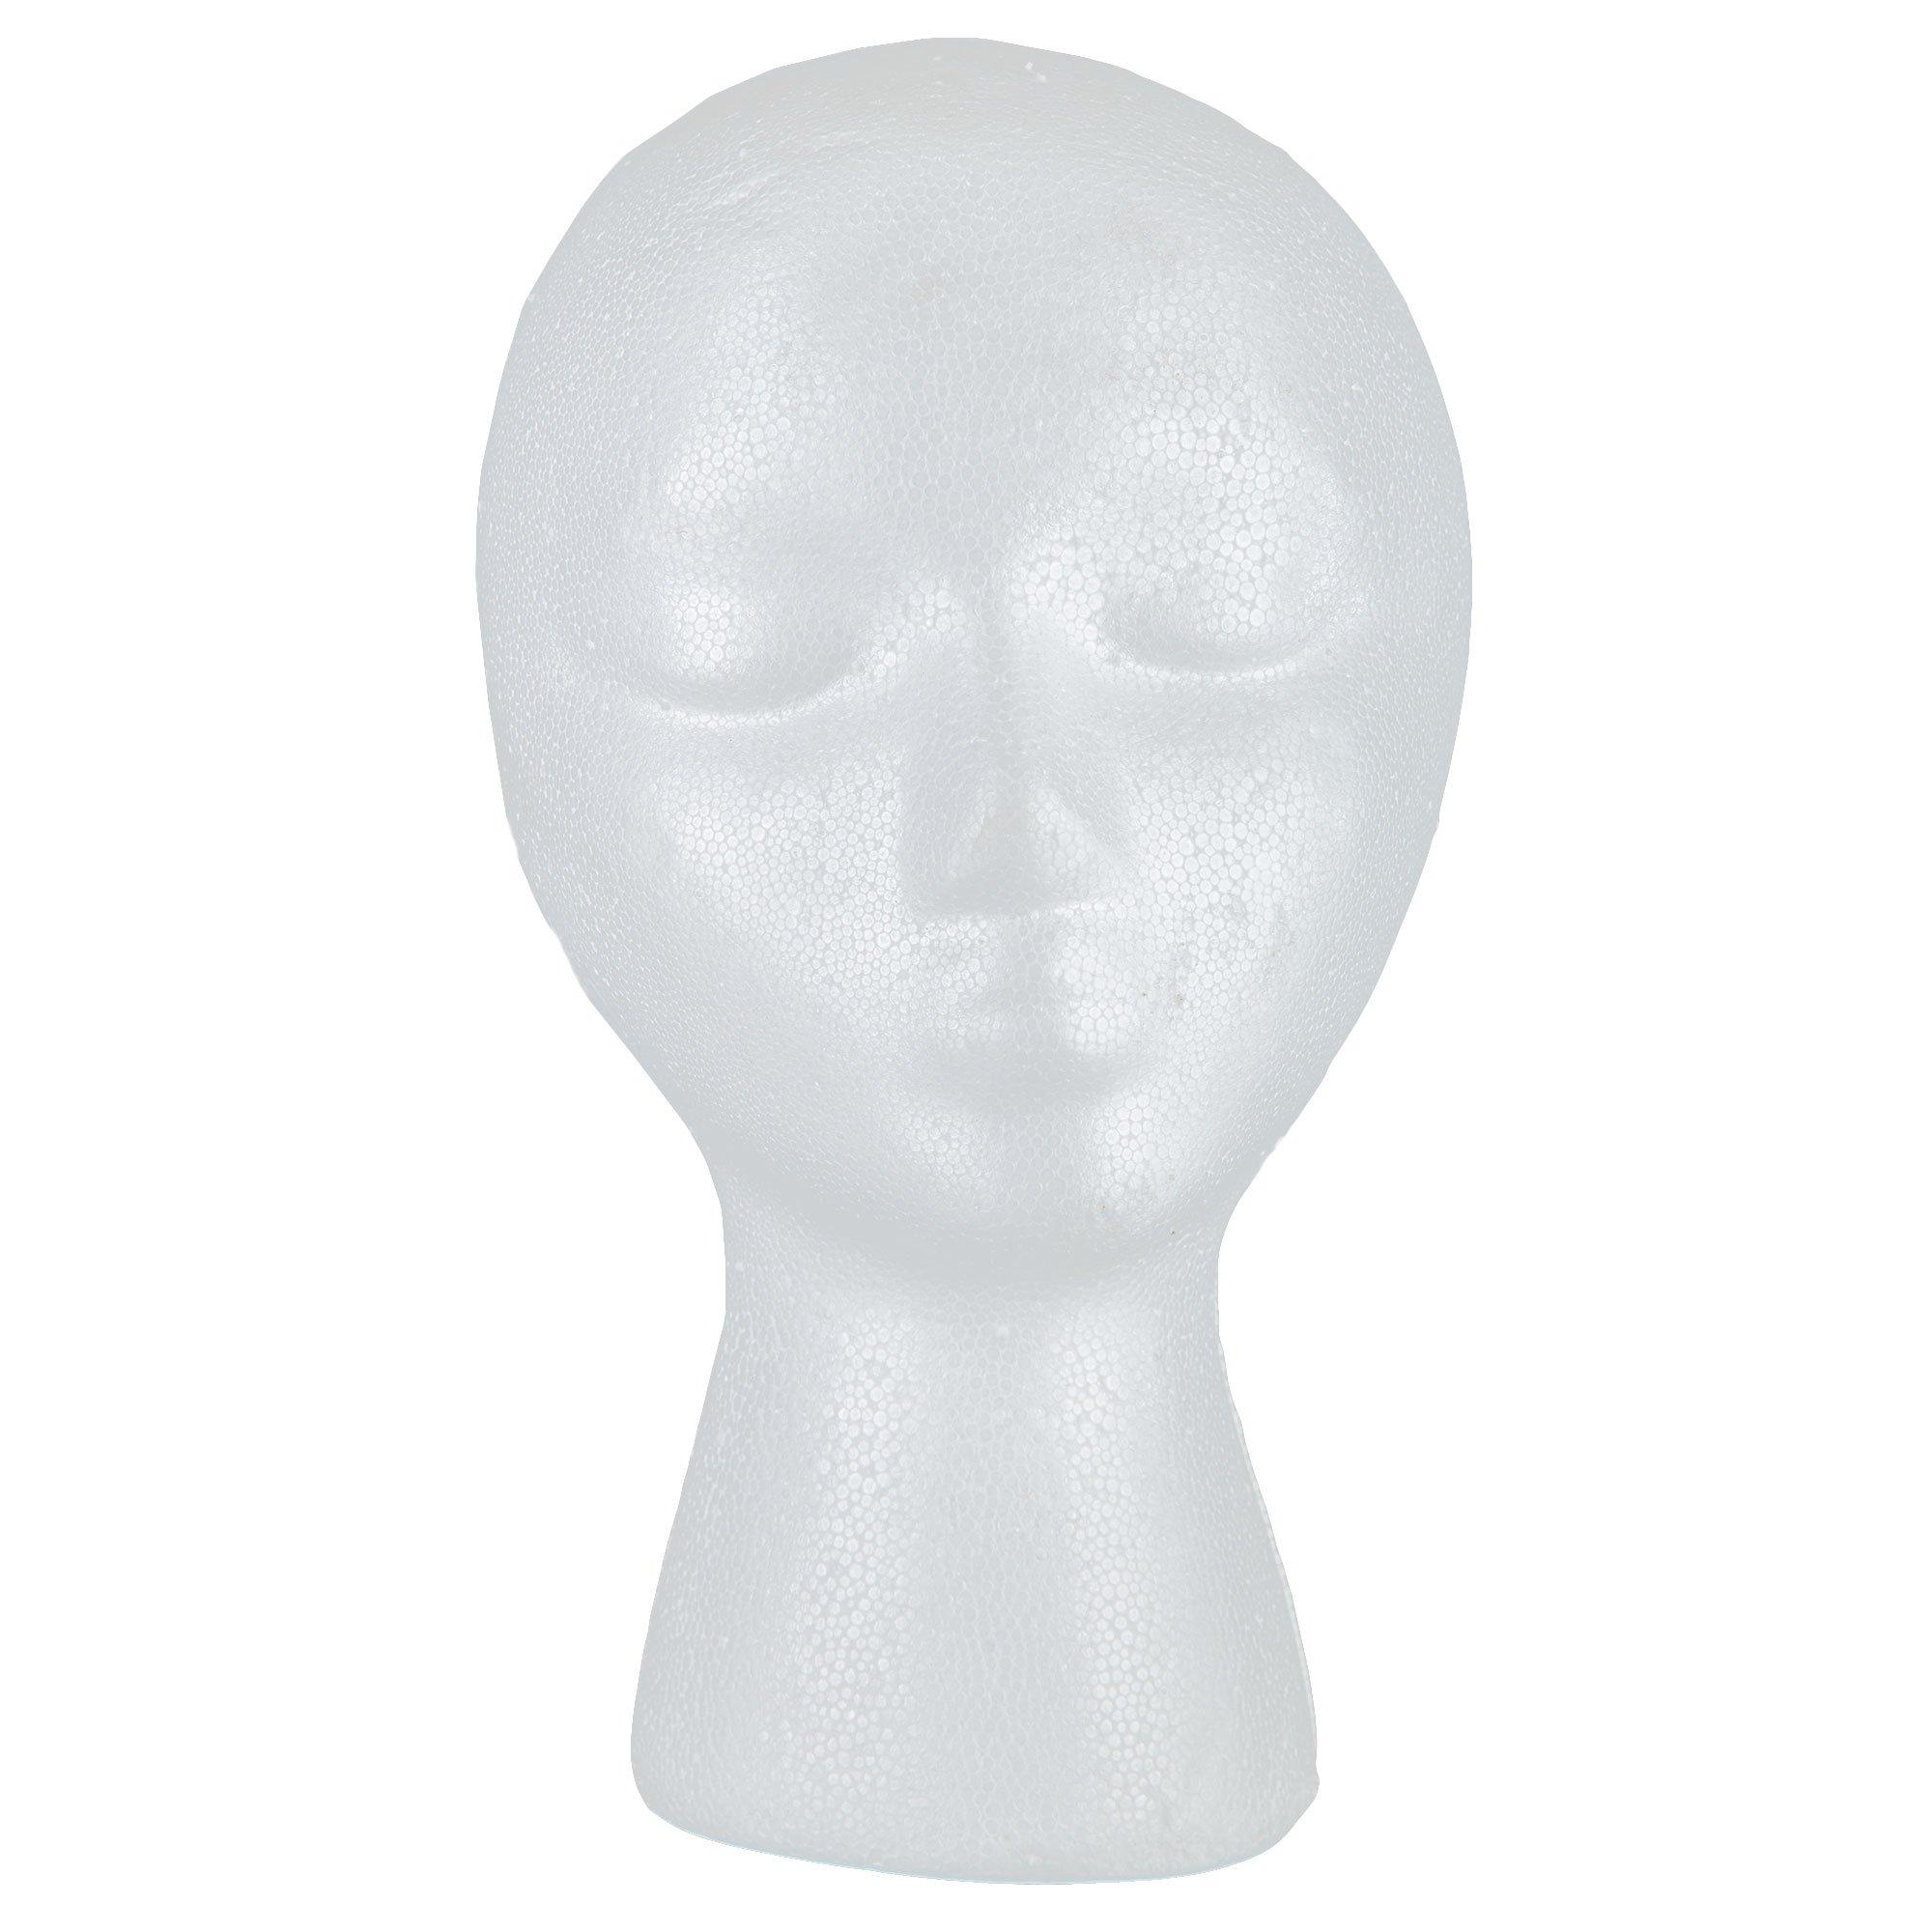 Shany Styrofoam Mannequin Heads Wig Stand 1pc : Target